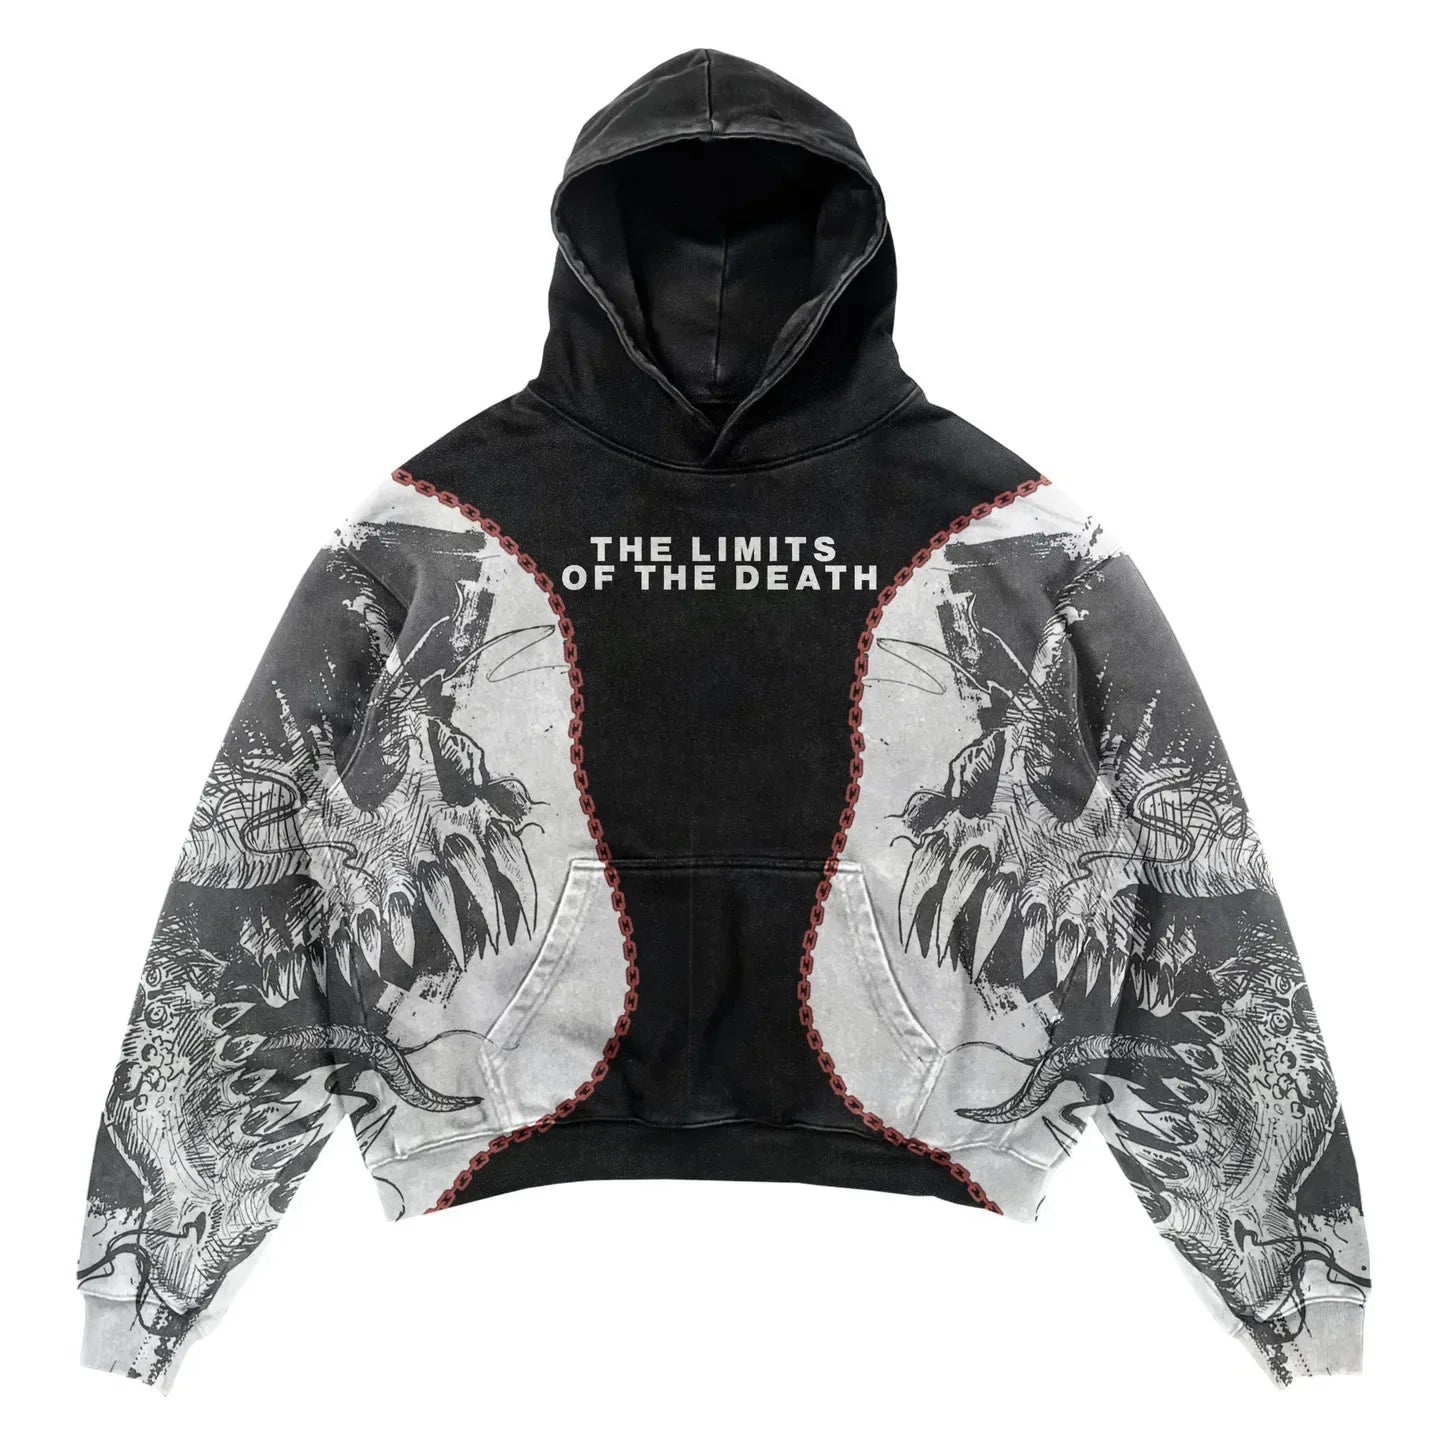 A Maramalive™ Explosions Printed Skull Y2K Retro Hooded Sweater Coat Street Style Gothic Casual Fashion Hooded Sweater Men's Female with artistic graphics of monstrous claws and teeth, and the text "THE LIMITS OF THE DEATH" emblazoned on the chest. Perfect for all four seasons, this punk-style piece is a bold addition to any wardrobe.